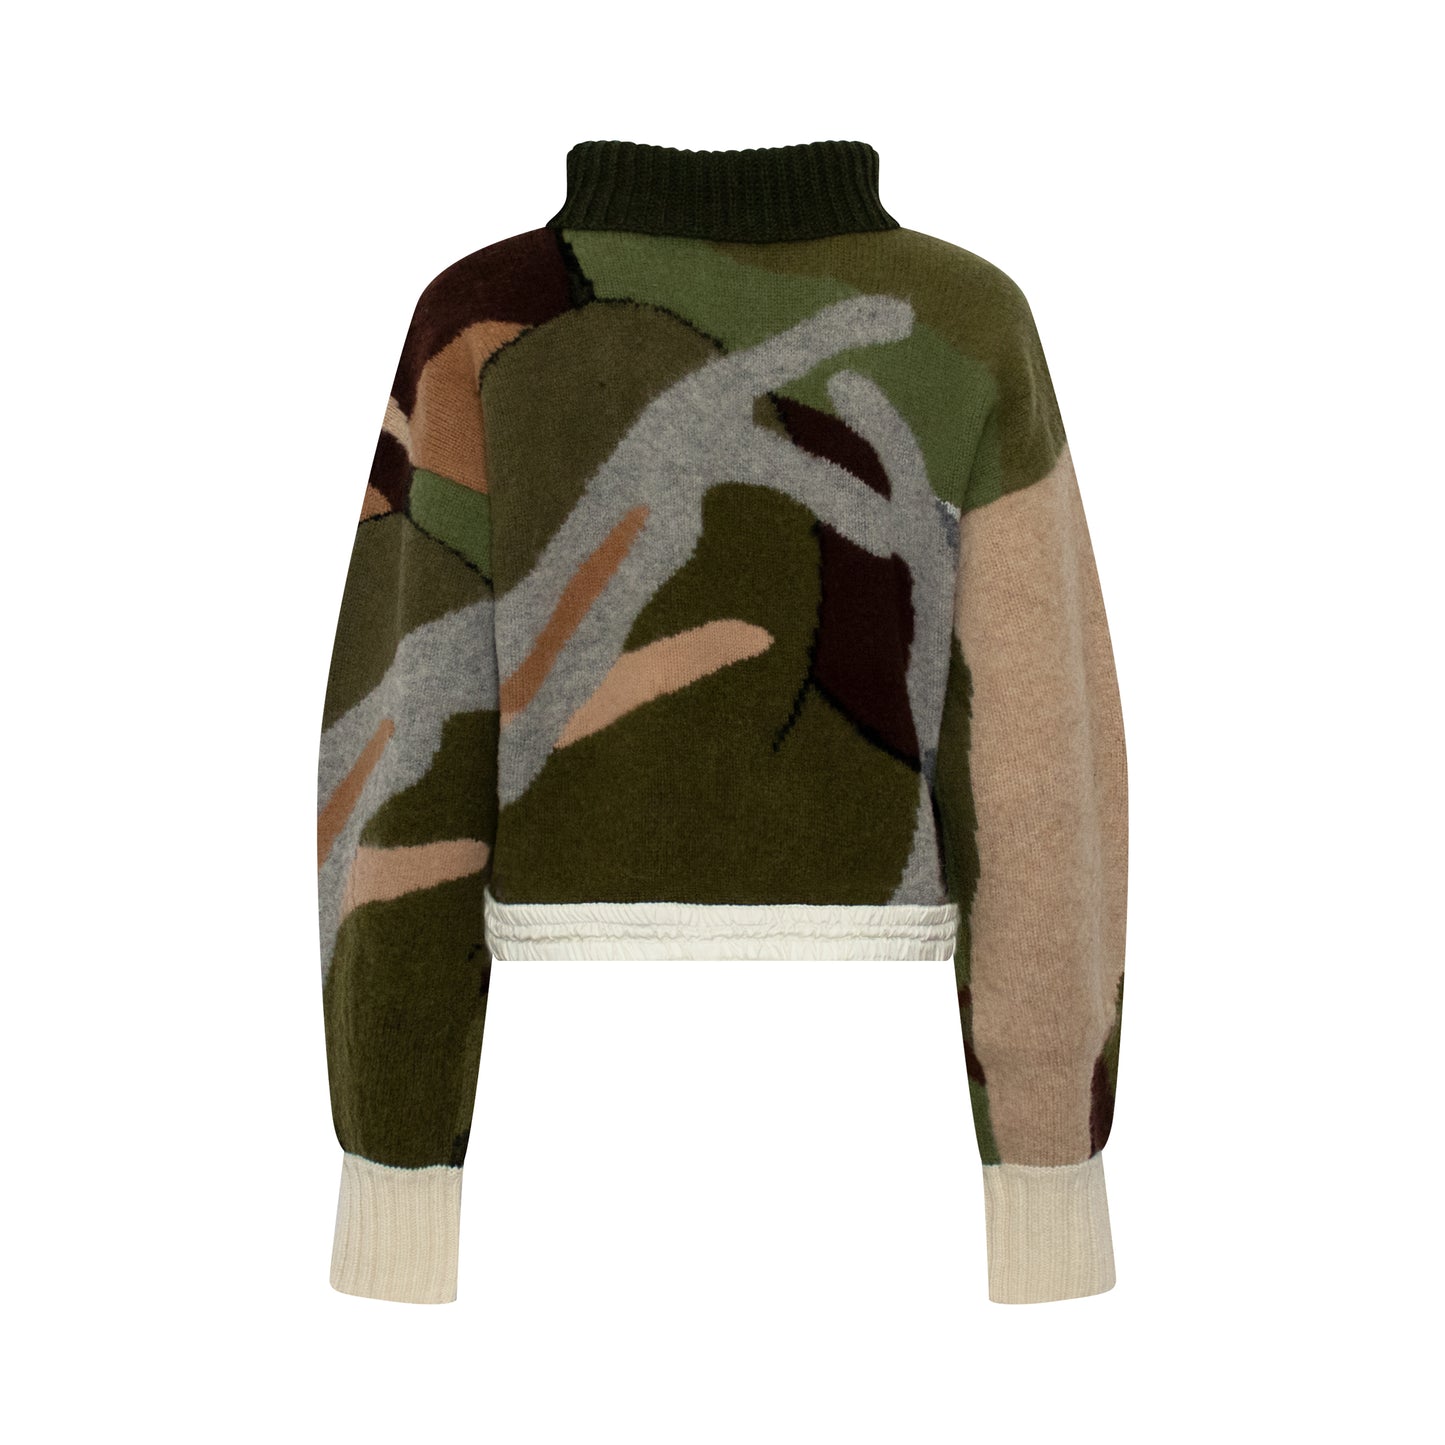 Kaws Jacquard Knit Sweater in Camouflage